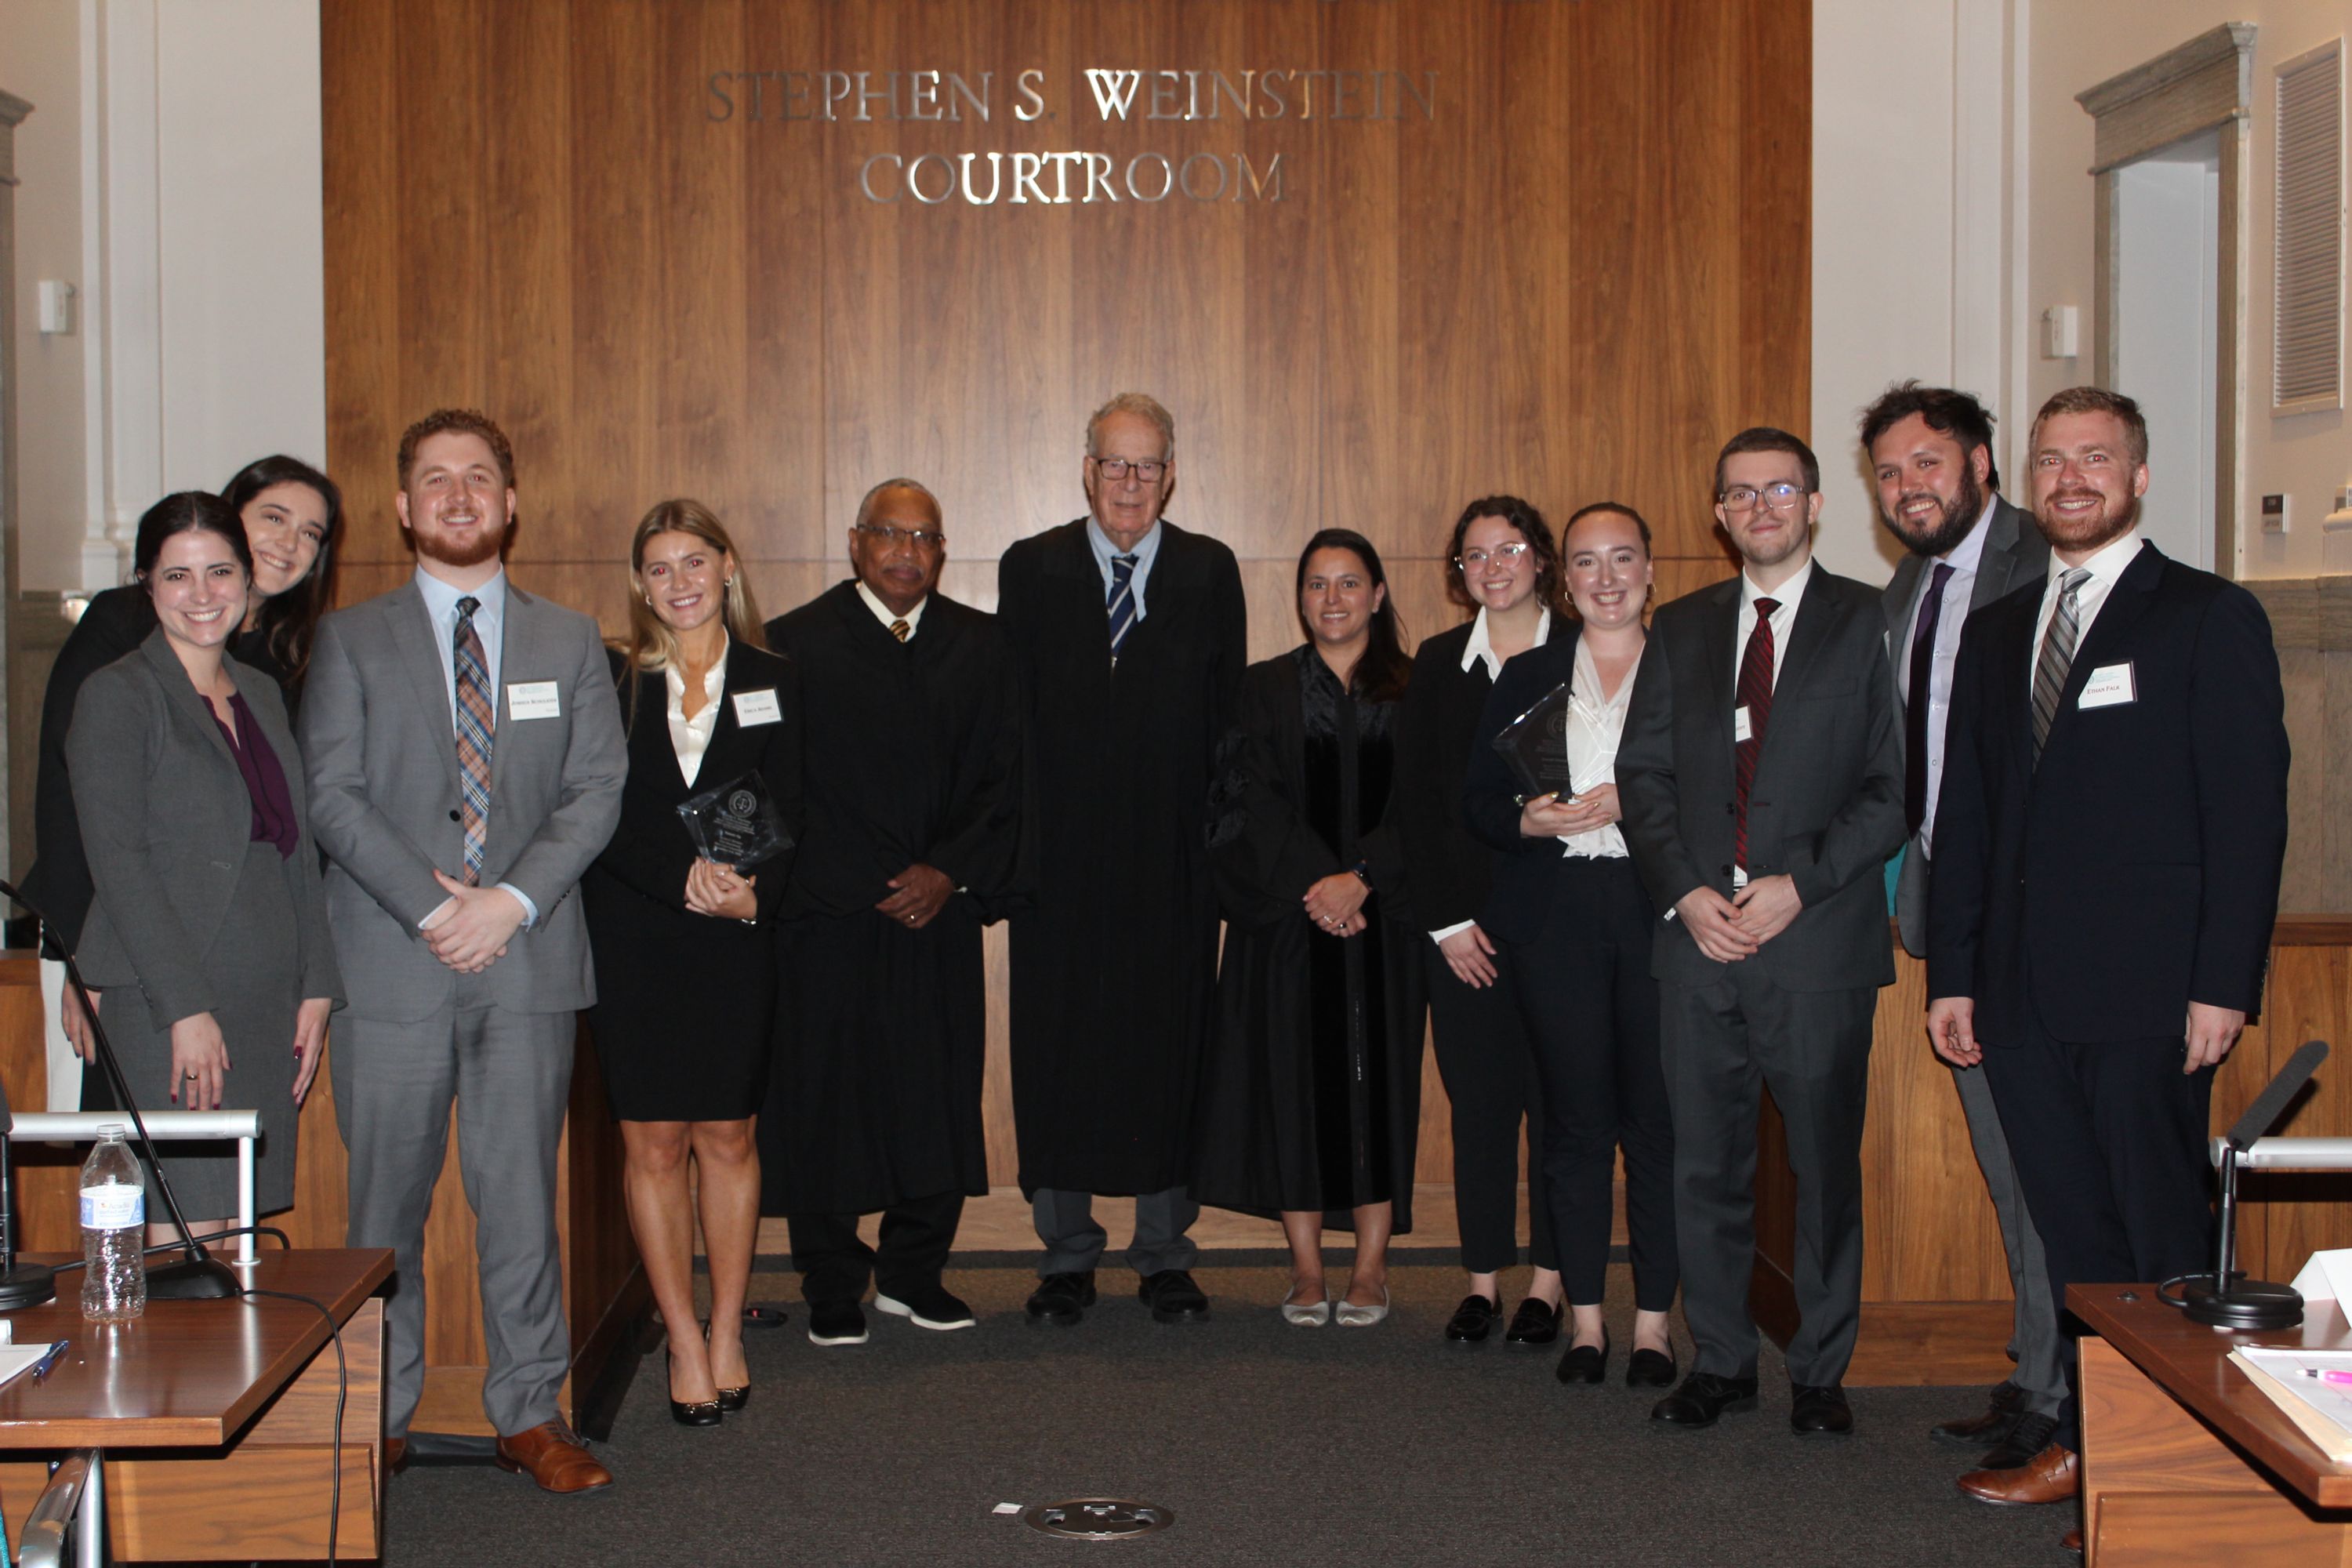 Burton D. Wechsler First Amendment Competition (Inter-school competition hosted in November)